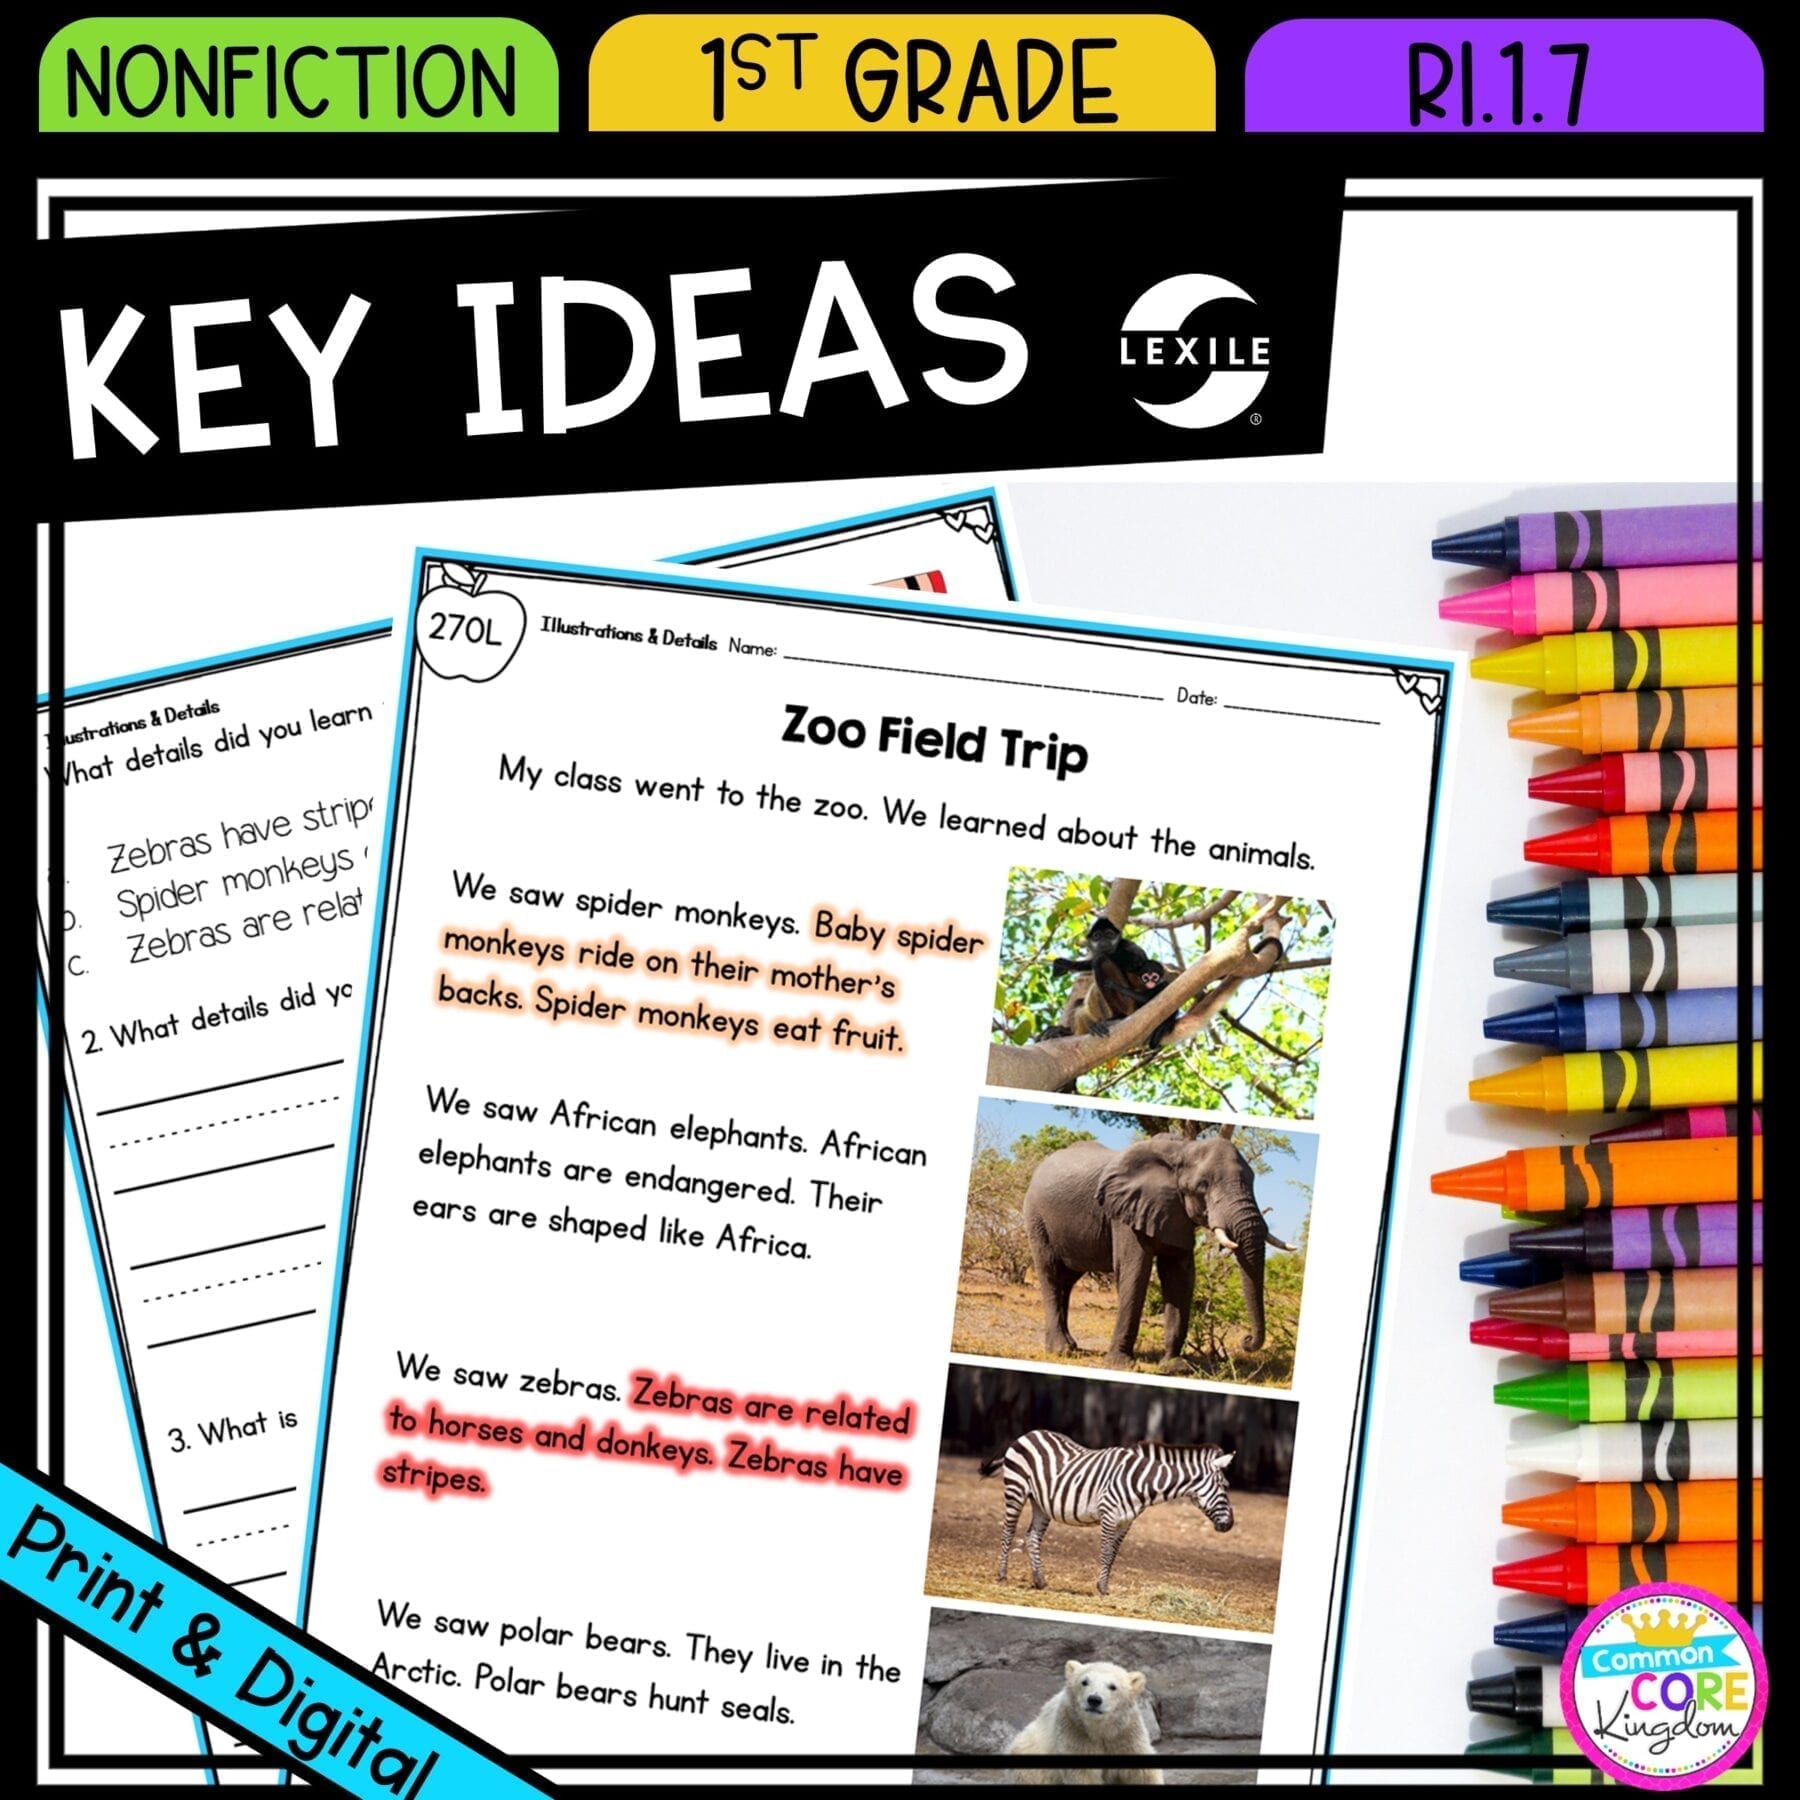 Describe Key Ideas with Illustrations & Details for 1st grade cover showing printable and digital worksheets